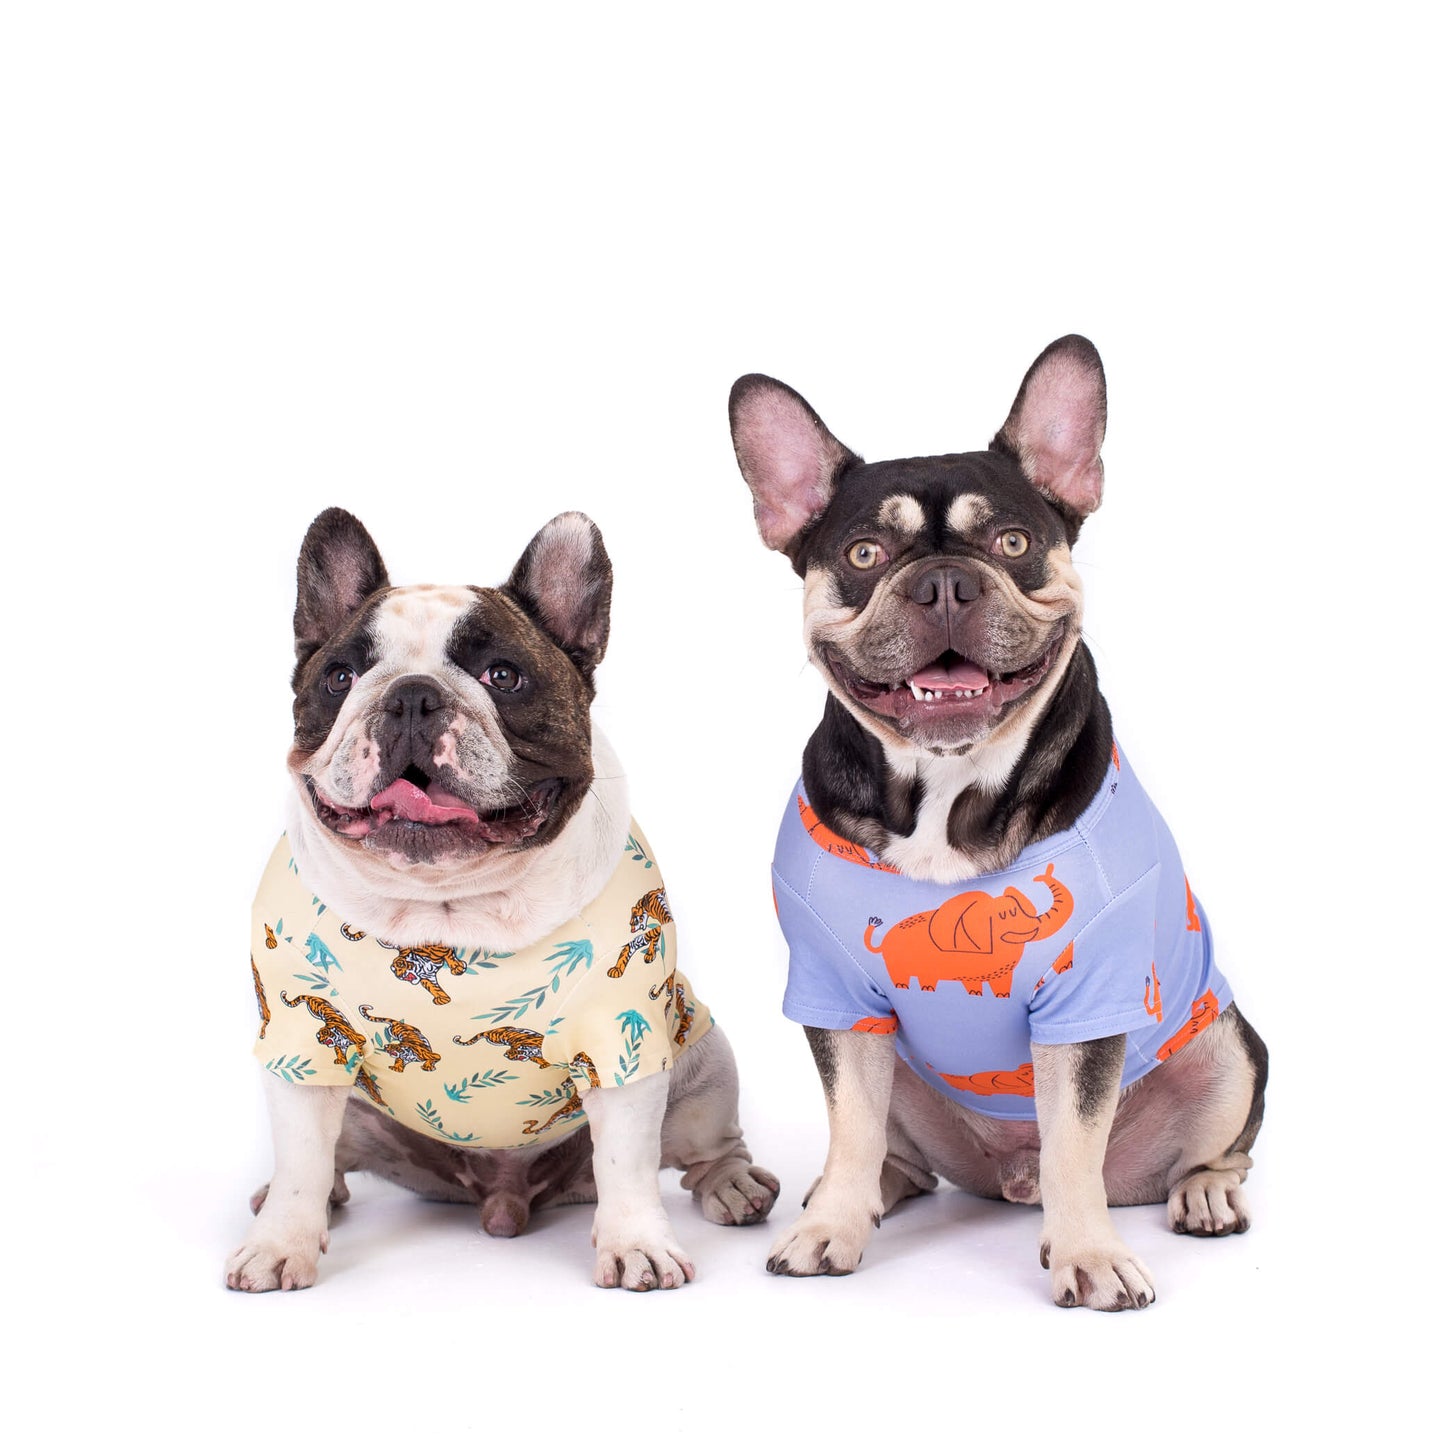 Two French Bulldogs wearing stylish dog shirts - Wild Child and Electric Elephant. Wild Child shirt features a yellow color with orange tiger prints, while Electric Elephant shirt showcases a lilac hue with orange elephant designs. Discover fashionable dog clothing for your furry companions at Vibrant Hound.